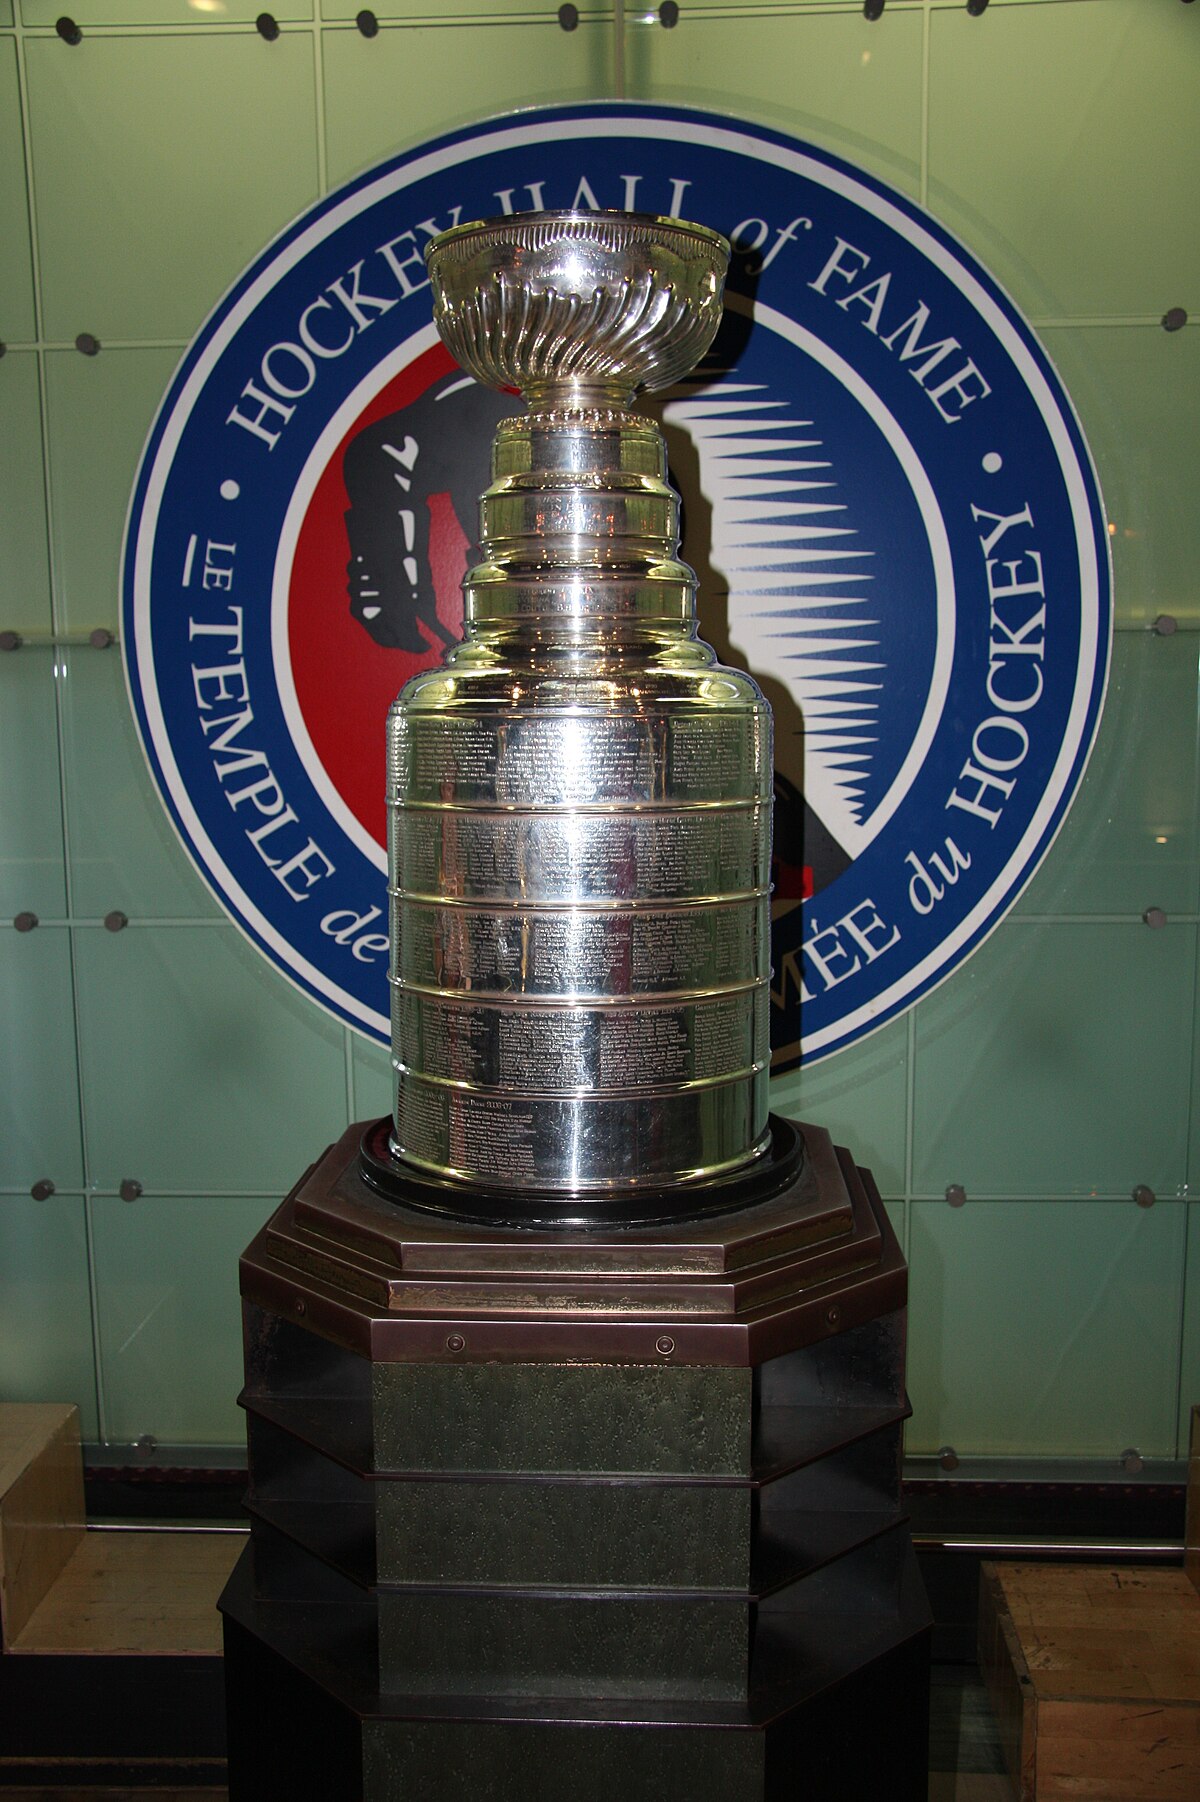 https://upload.wikimedia.org/wikipedia/commons/thumb/8/82/Stanley_Cup_in_Hockey_Hall_of_Fame_%28may_2008%29.jpg/1200px-Stanley_Cup_in_Hockey_Hall_of_Fame_%28may_2008%29.jpg